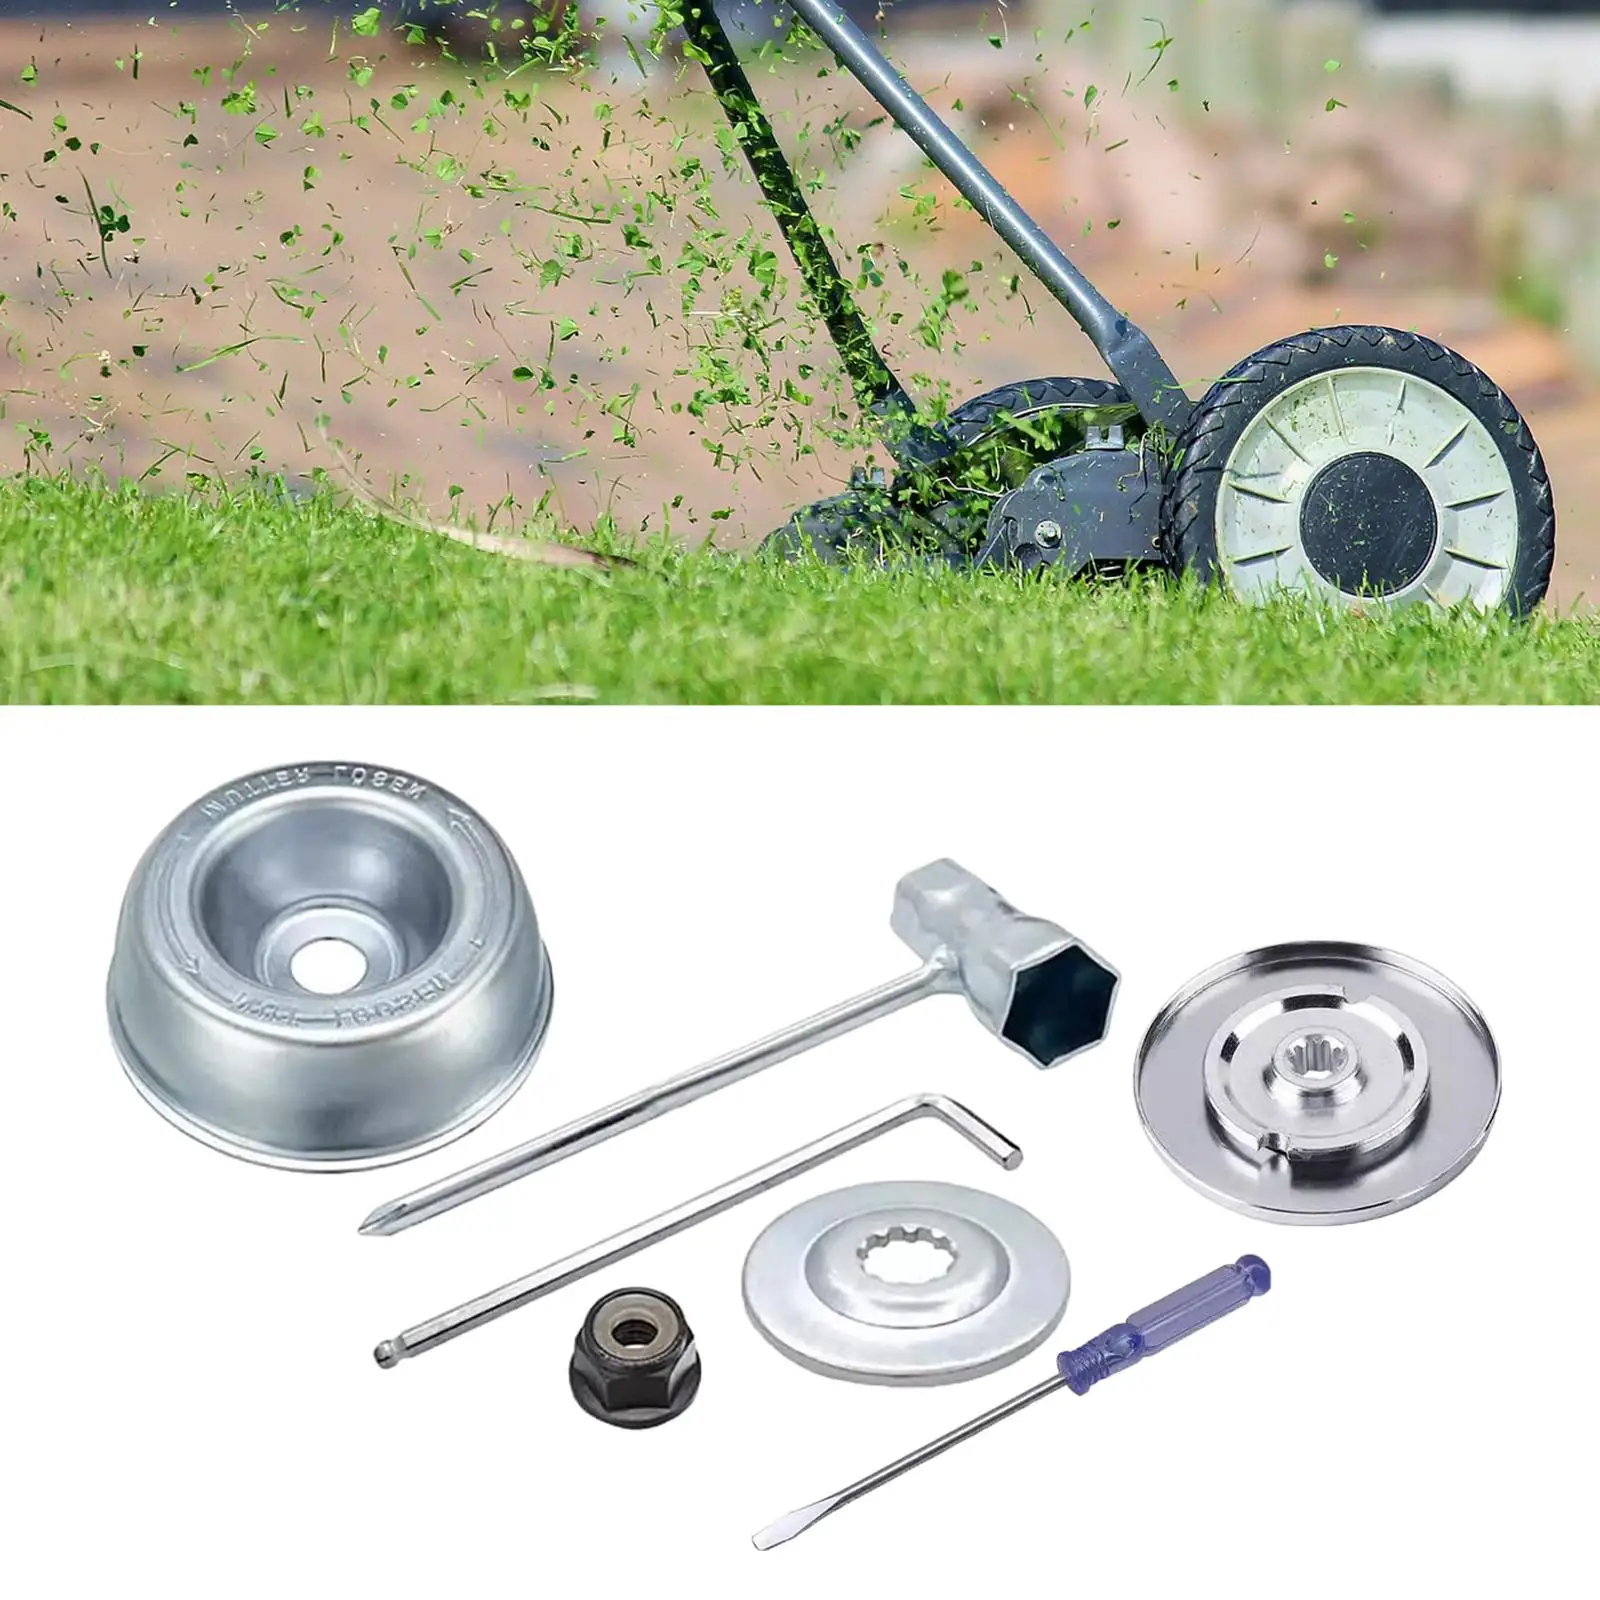 Brush Cutter Part Plates T Wrench Practical Durable Lawnmower Blade Adapter Kits for String Trimmer Brush Cutter Lawnmower